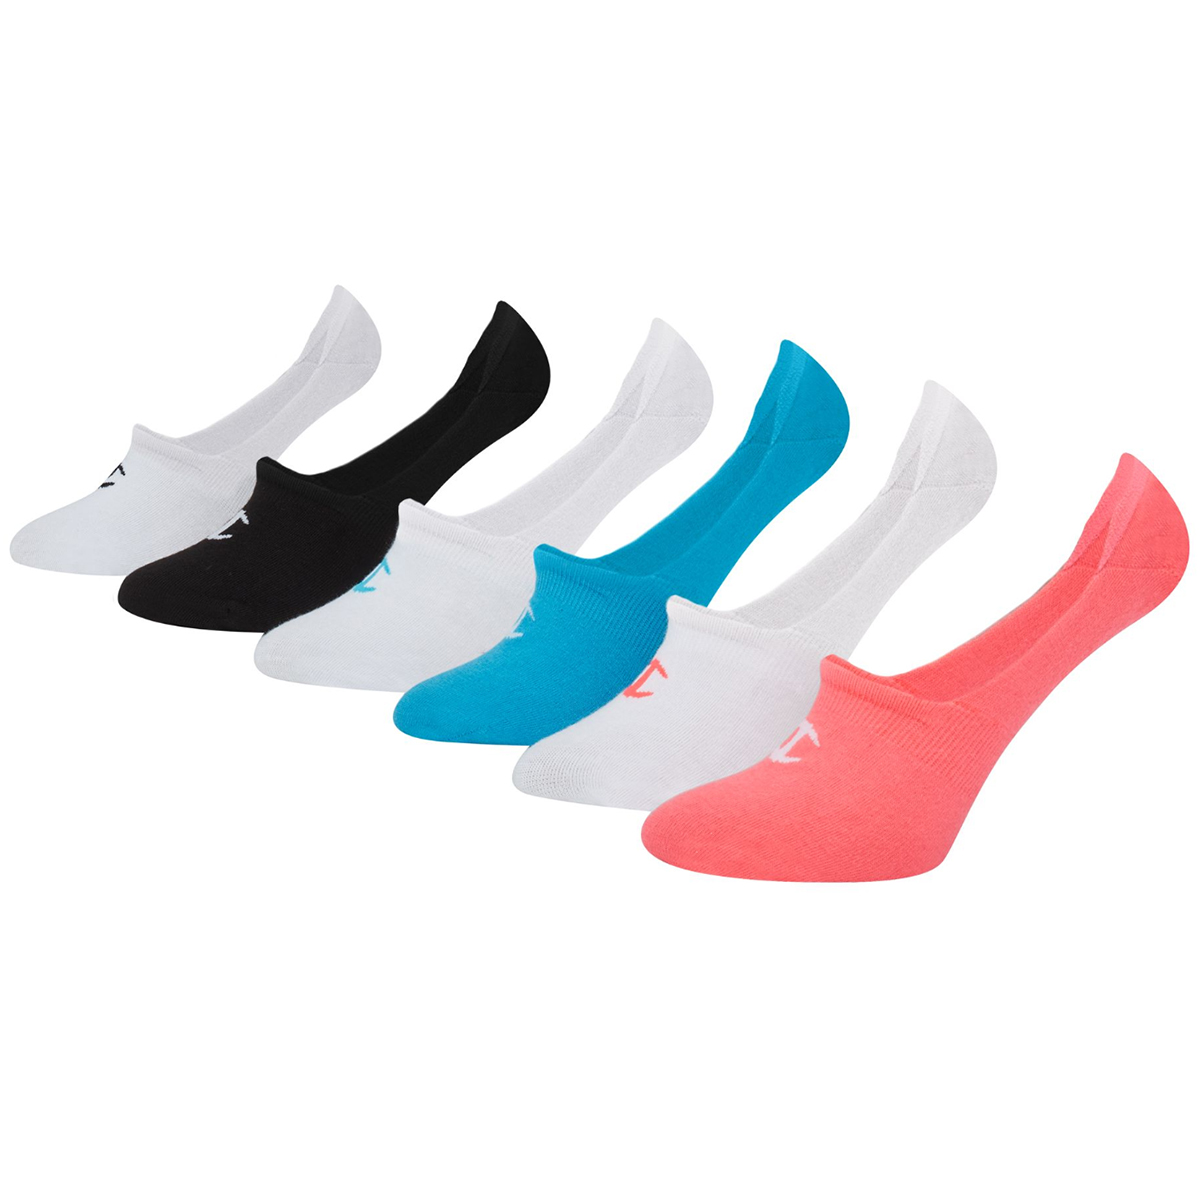 Champion Women's Performance Invisible Liner Socks, 6-Pack - Various Patterns, 9-11